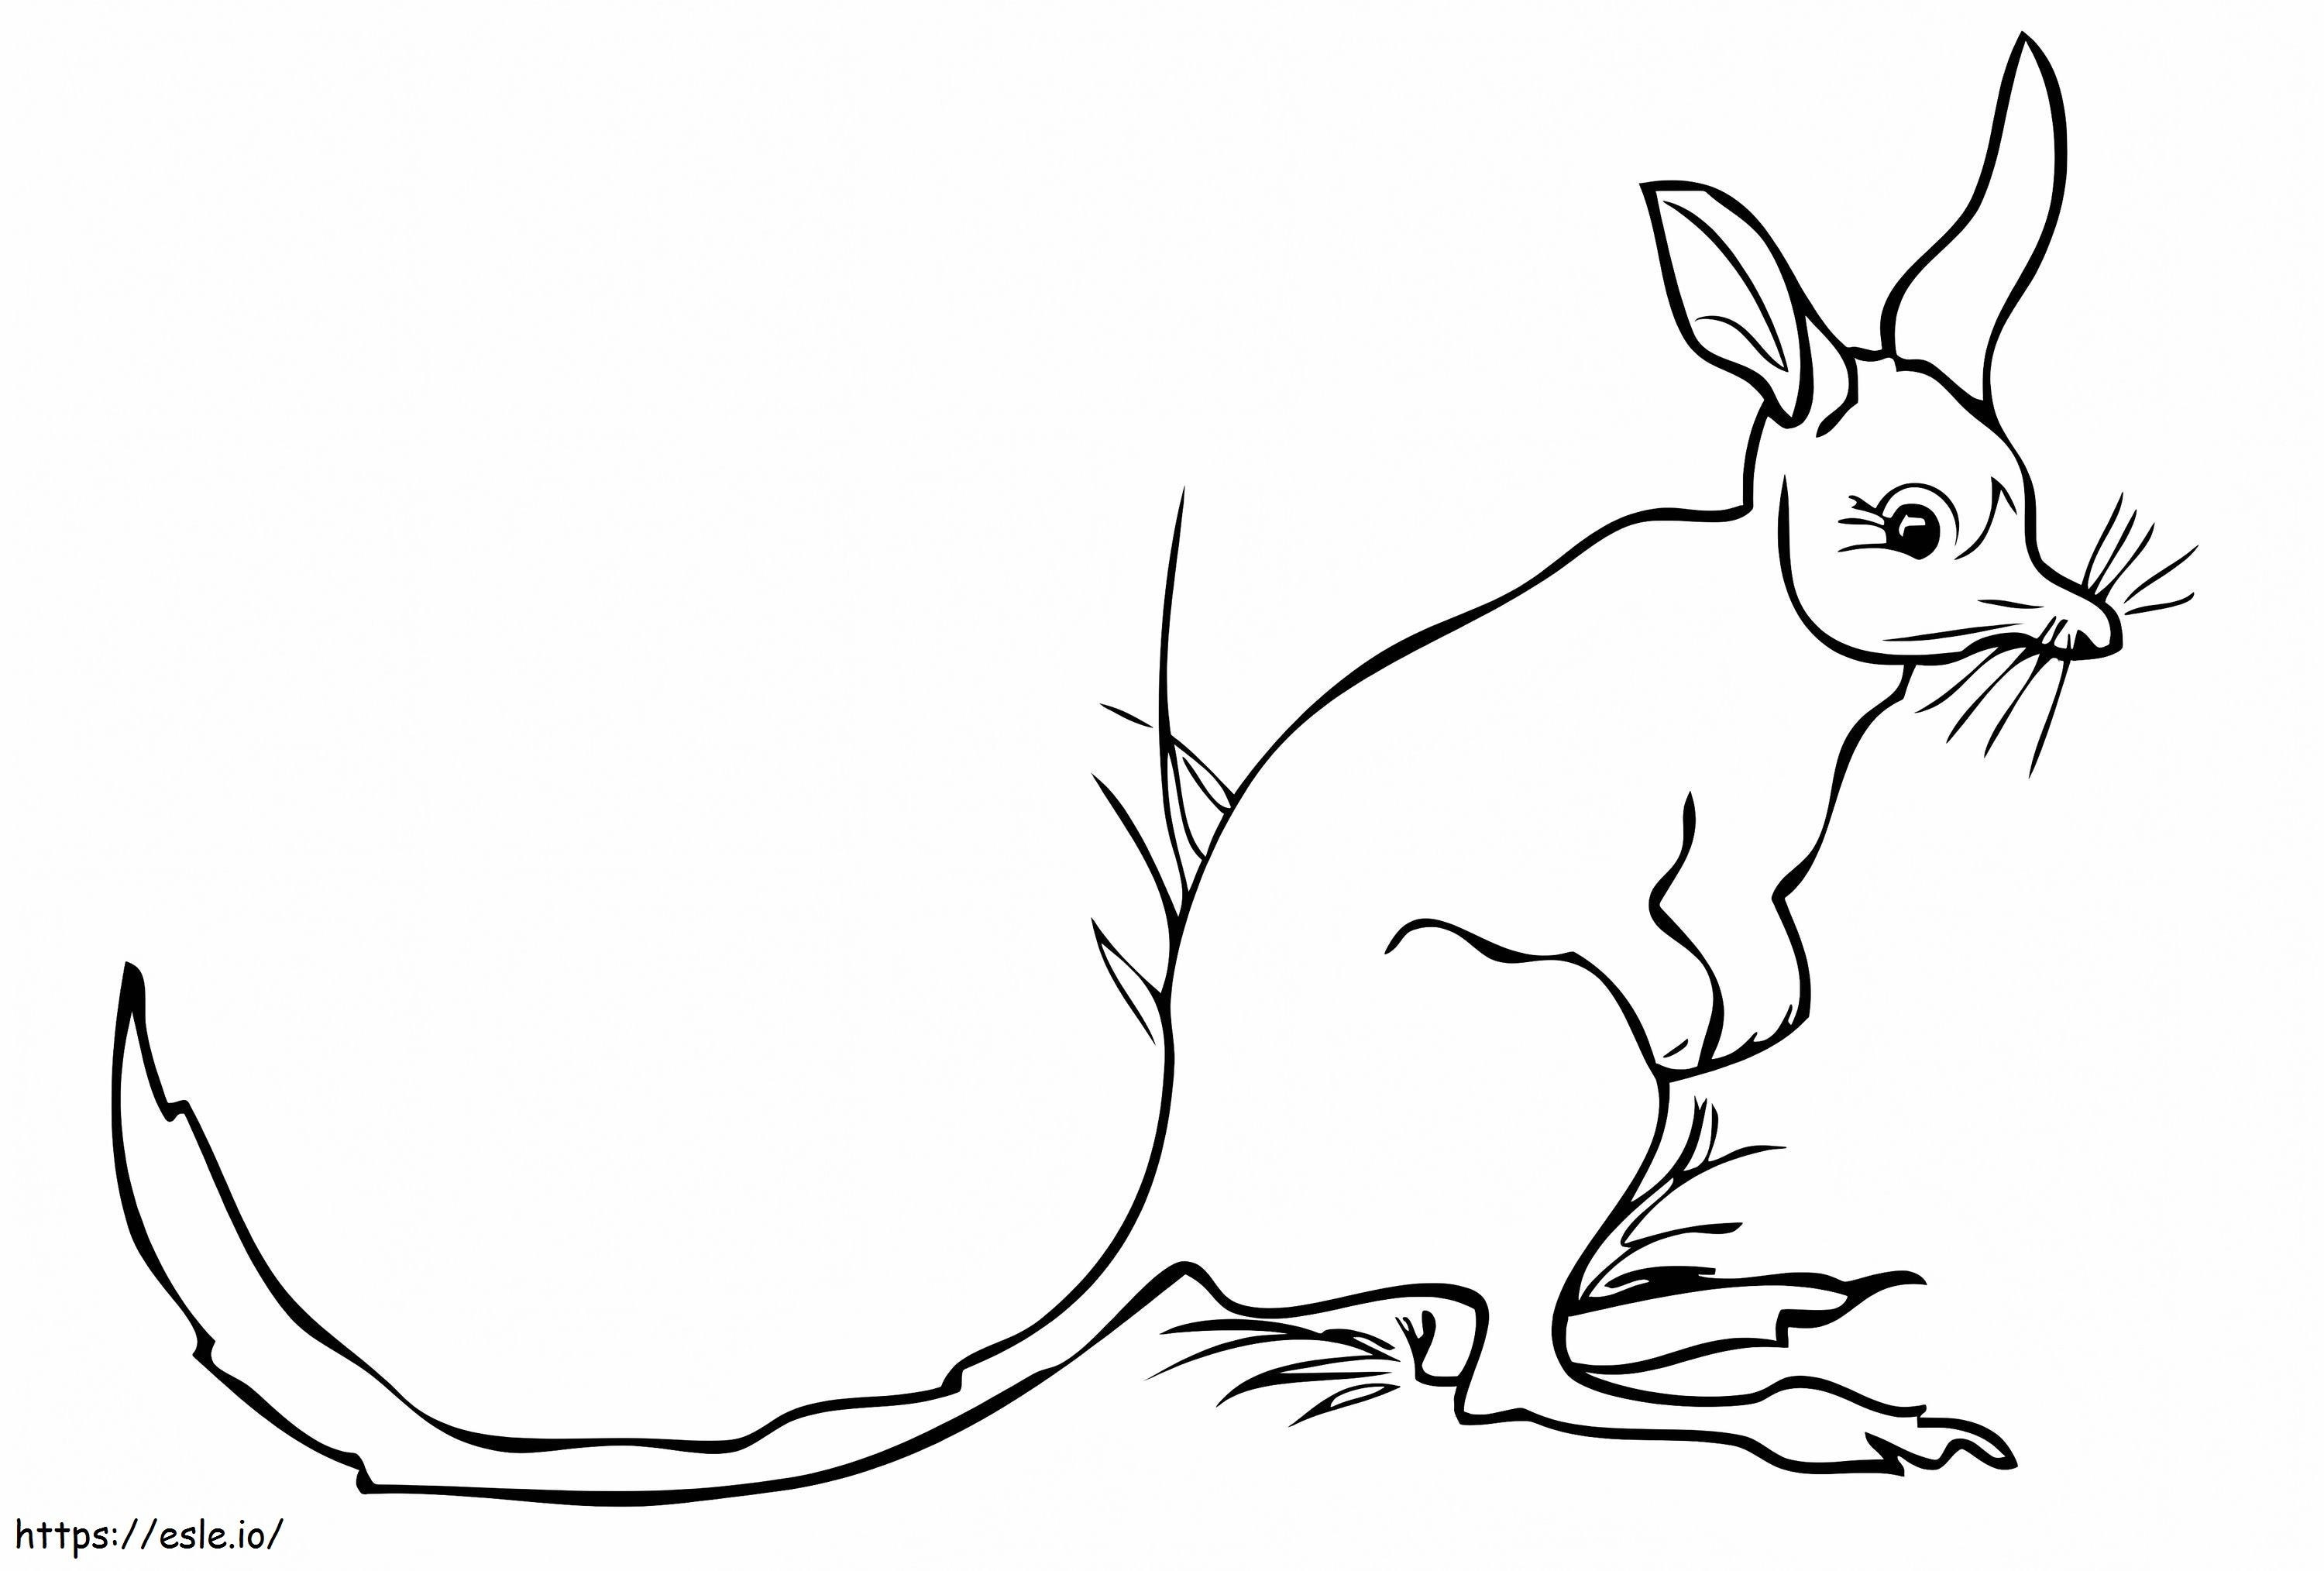 Greater Bilby coloring page